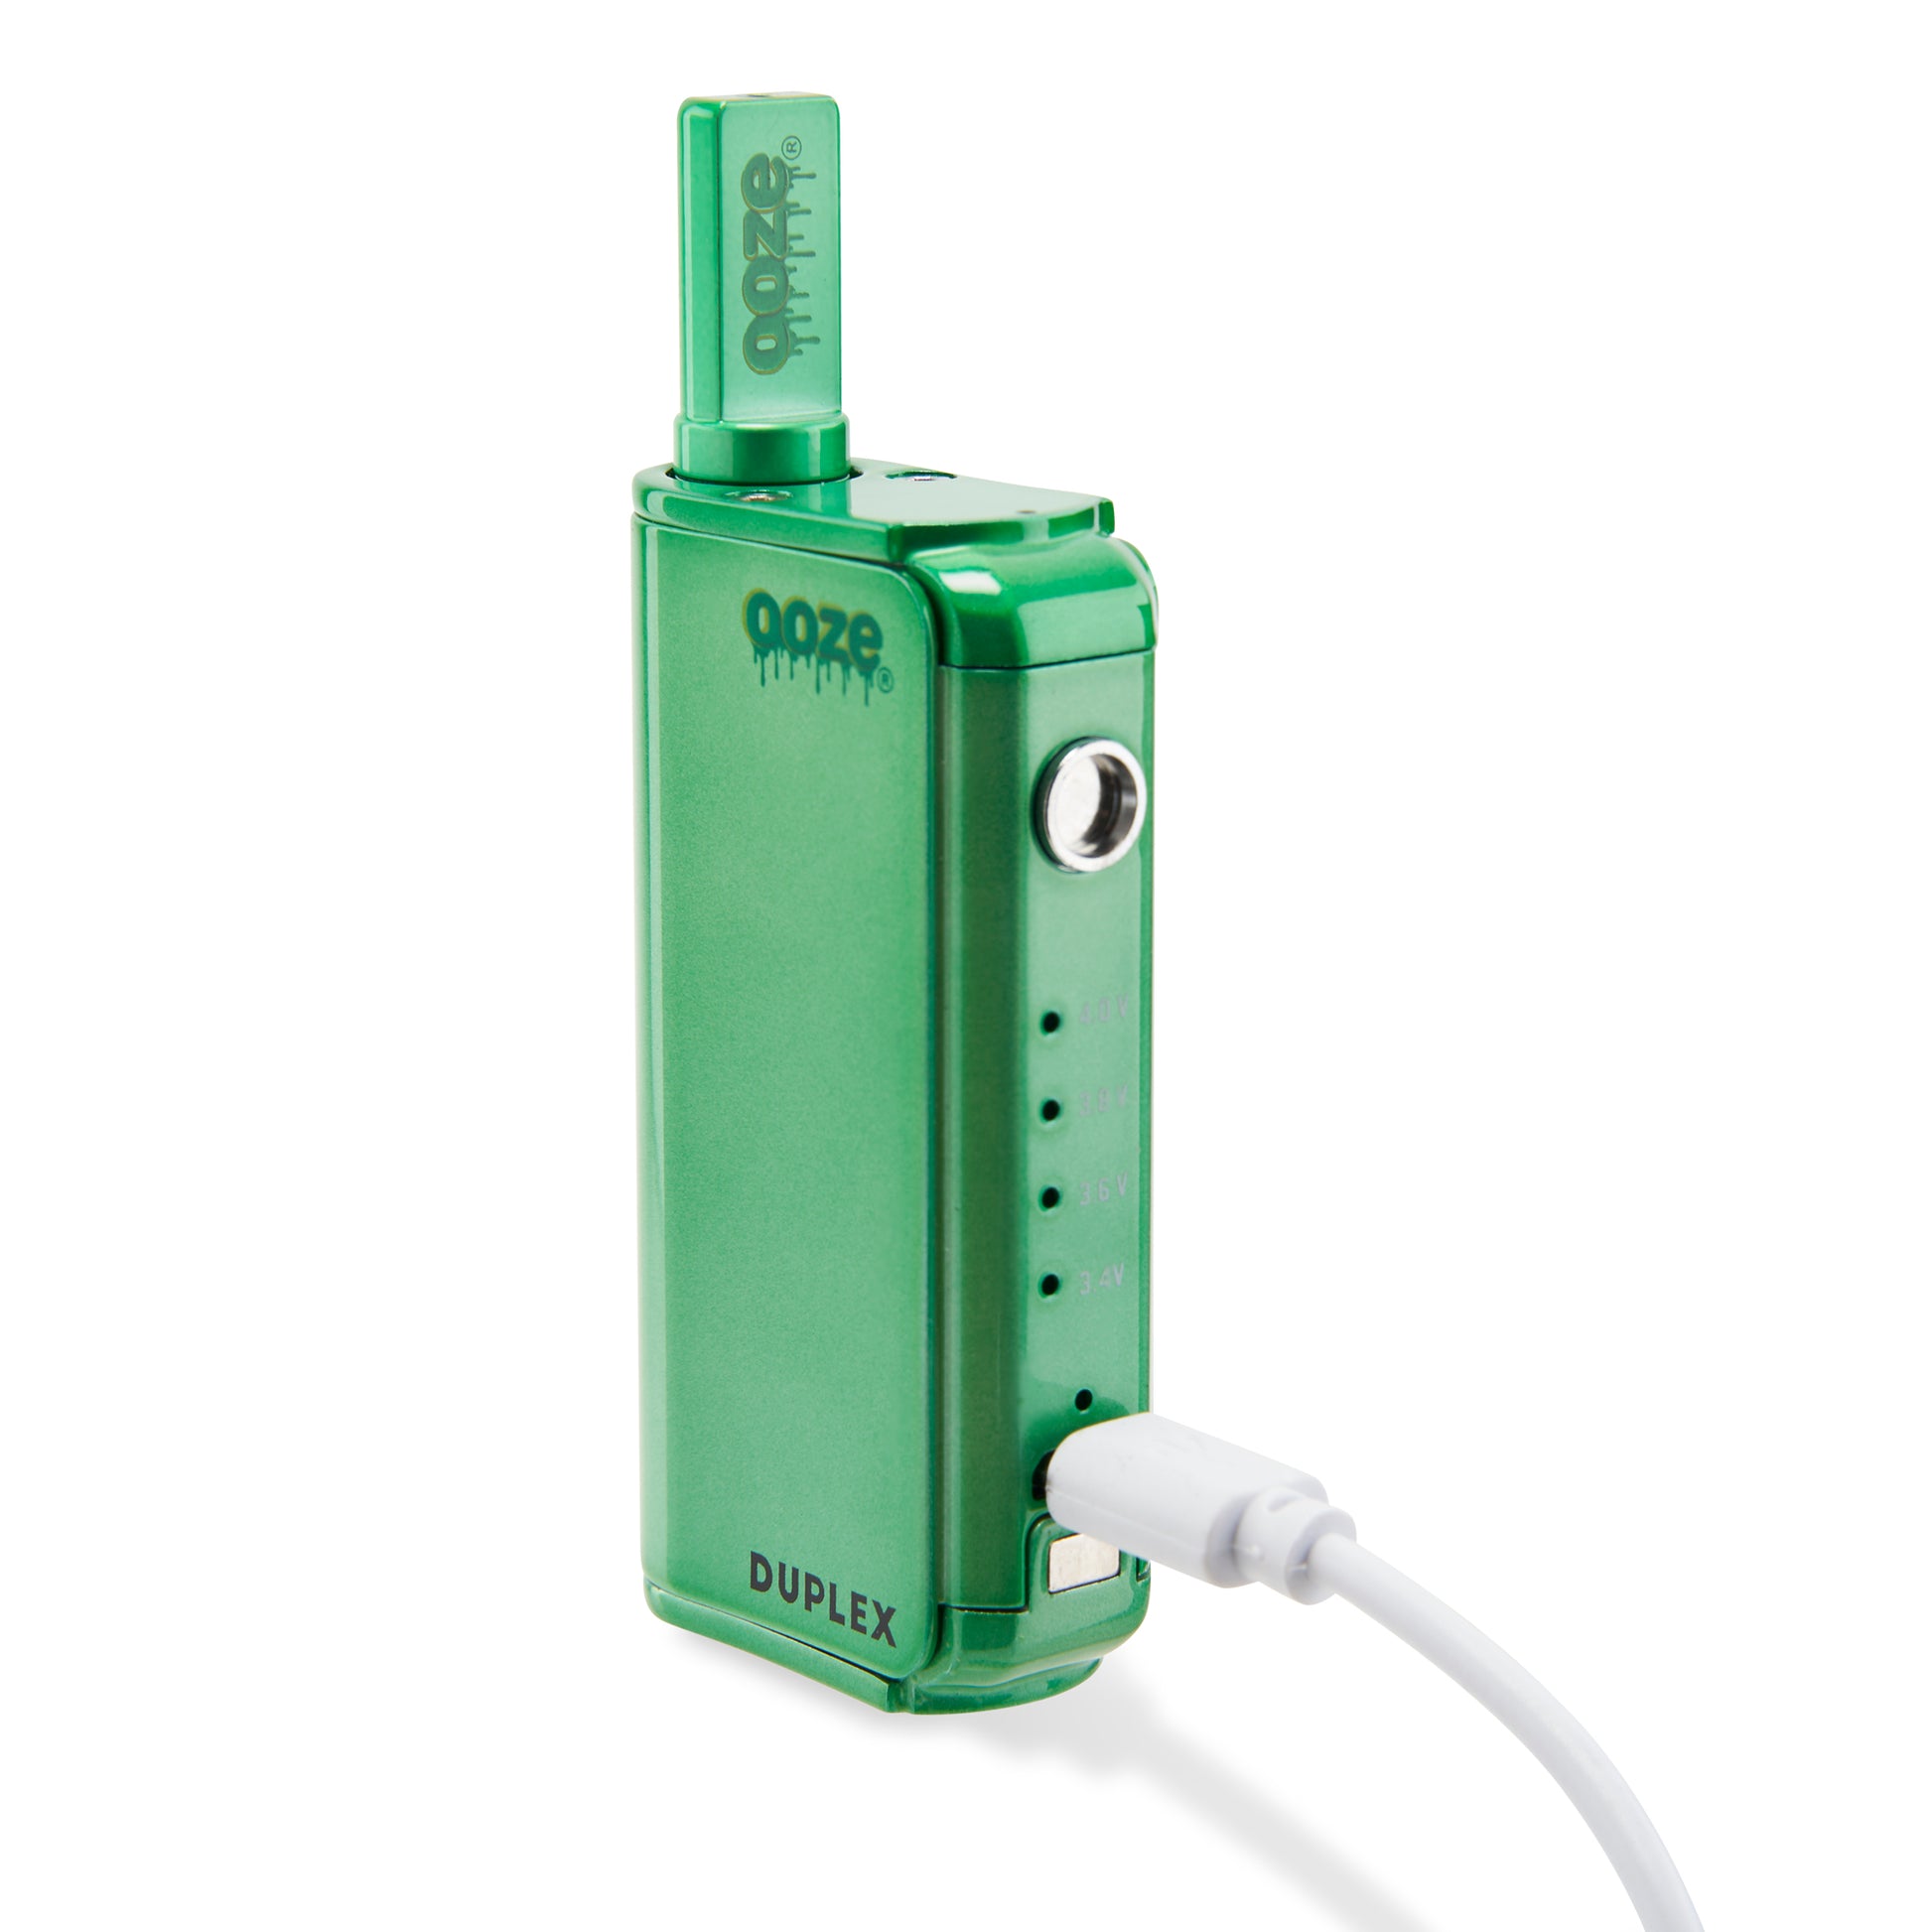 The Mary Jade Ooze Duplex Pro Vaporizer is shown with the magnetic button removed and the type-c charger plugged in.